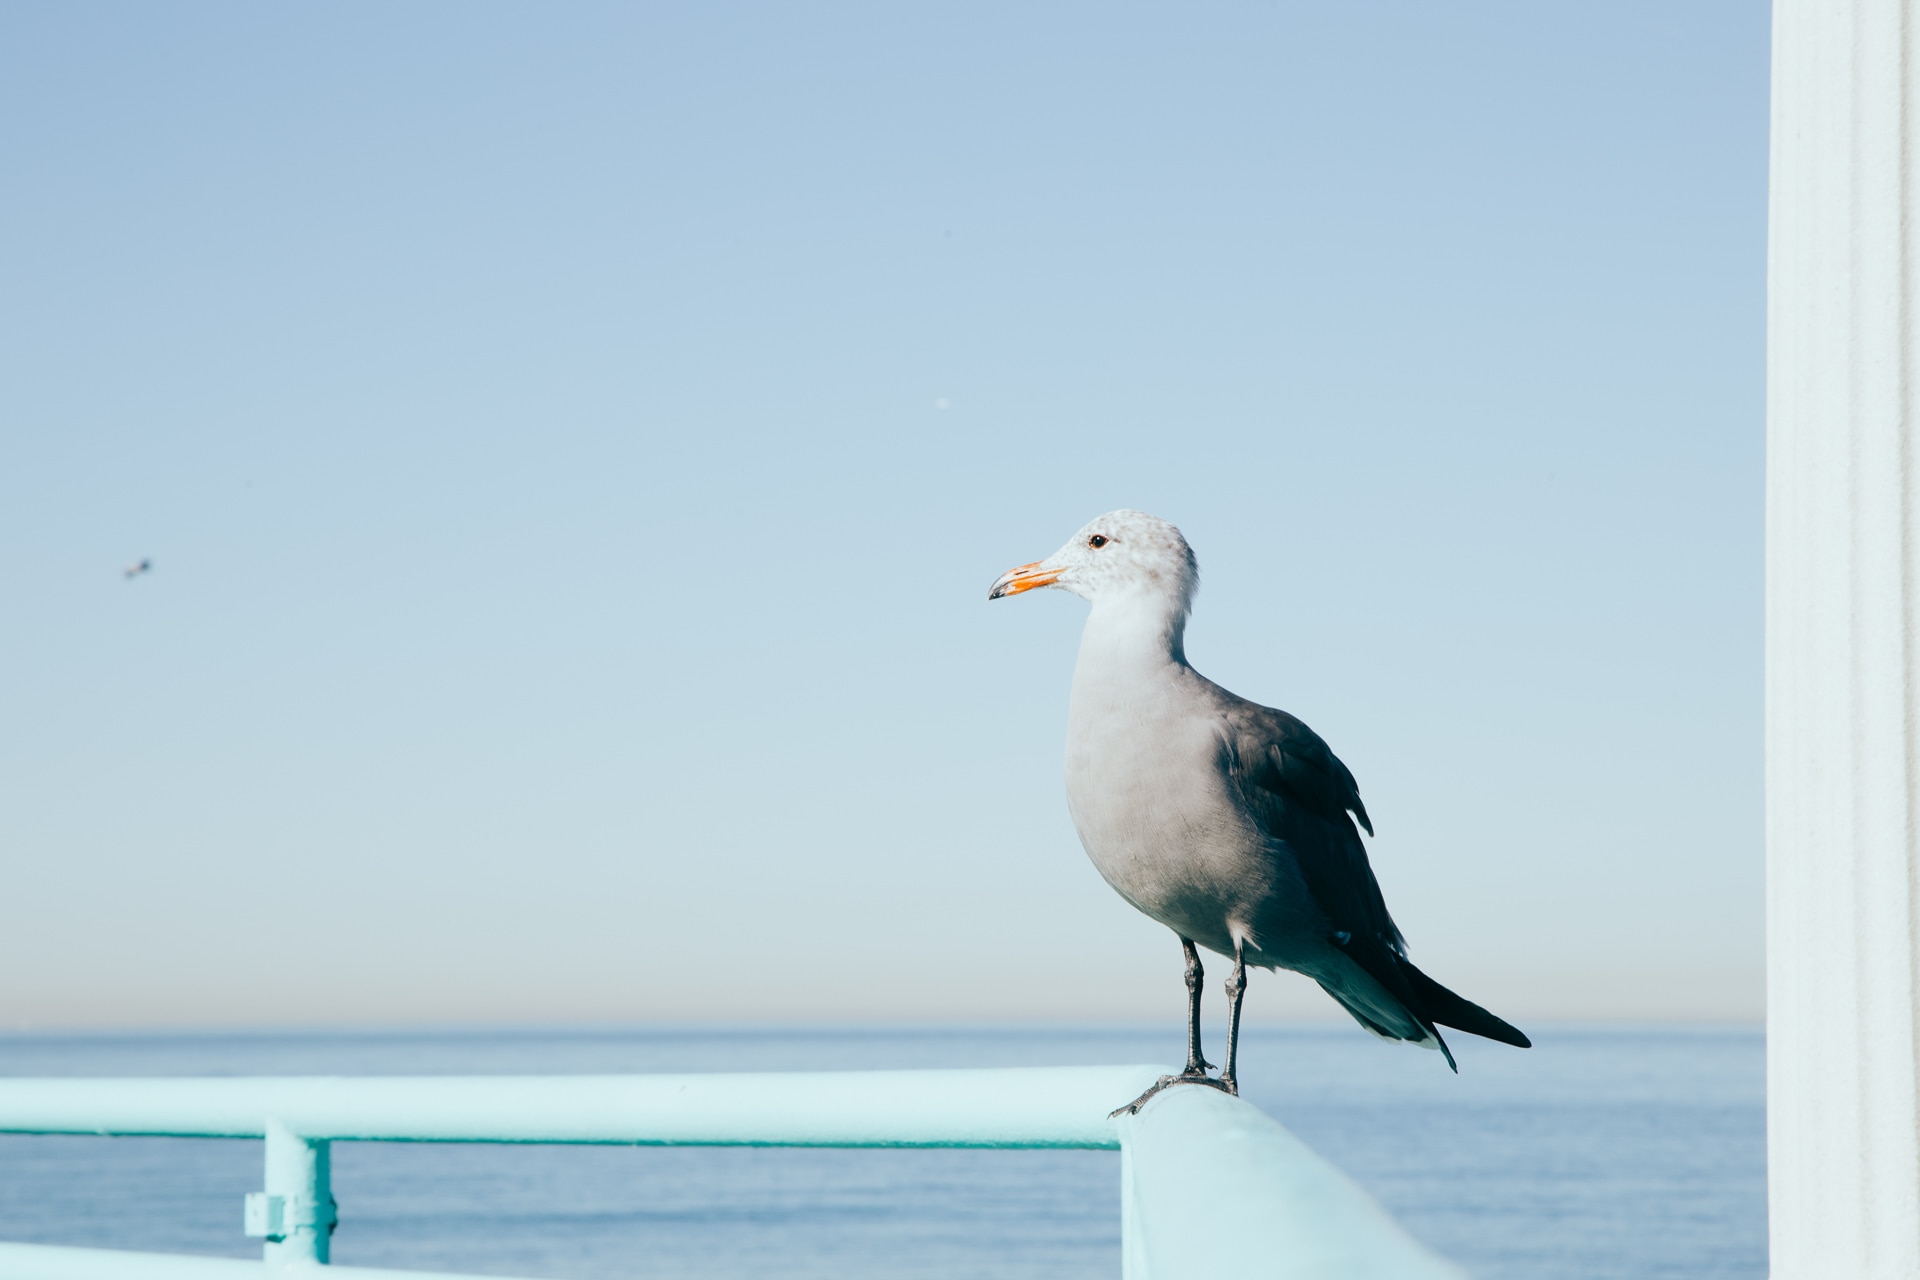 grey gull perched on teal metal railing